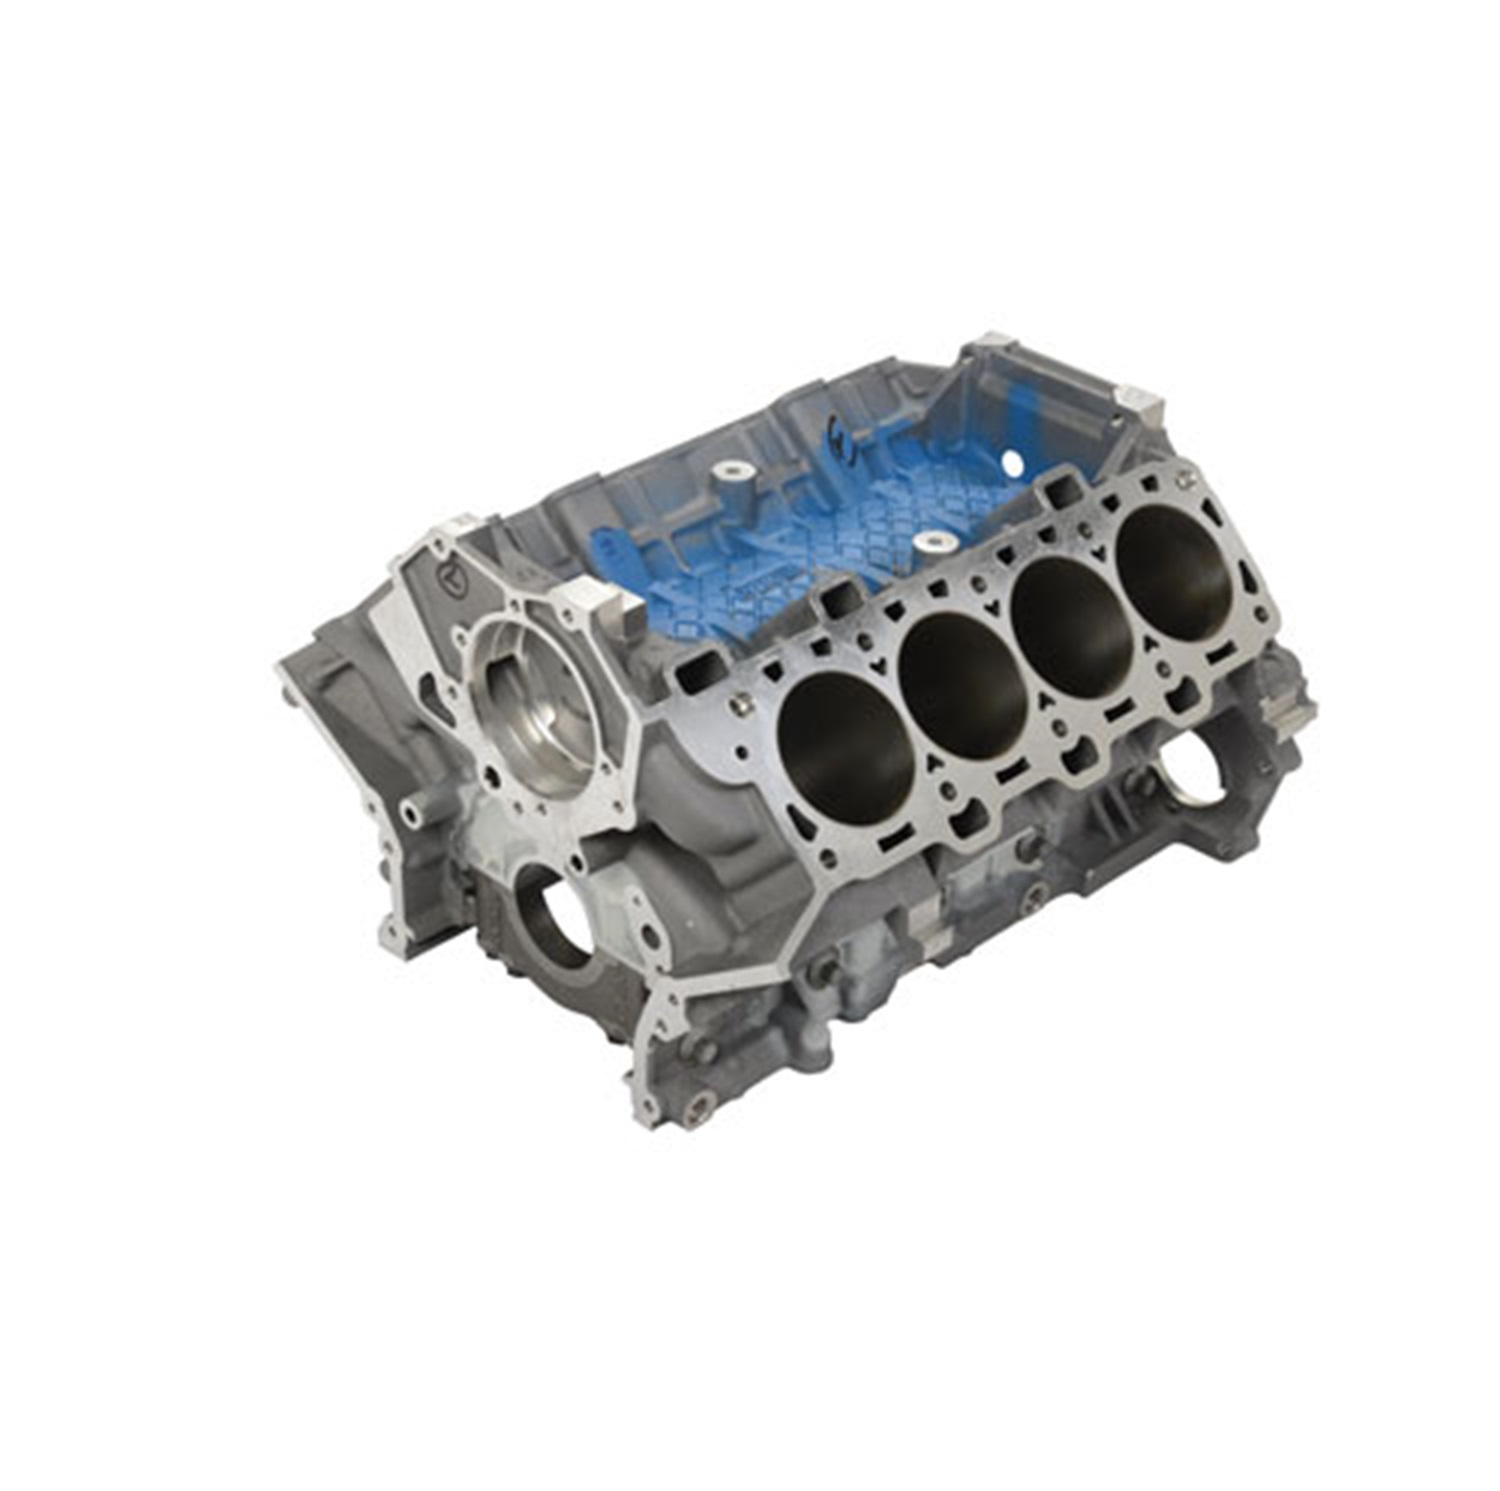 Ford Racing Ford Racing M-6010-M504VA Coyote 5.0L Engine Block